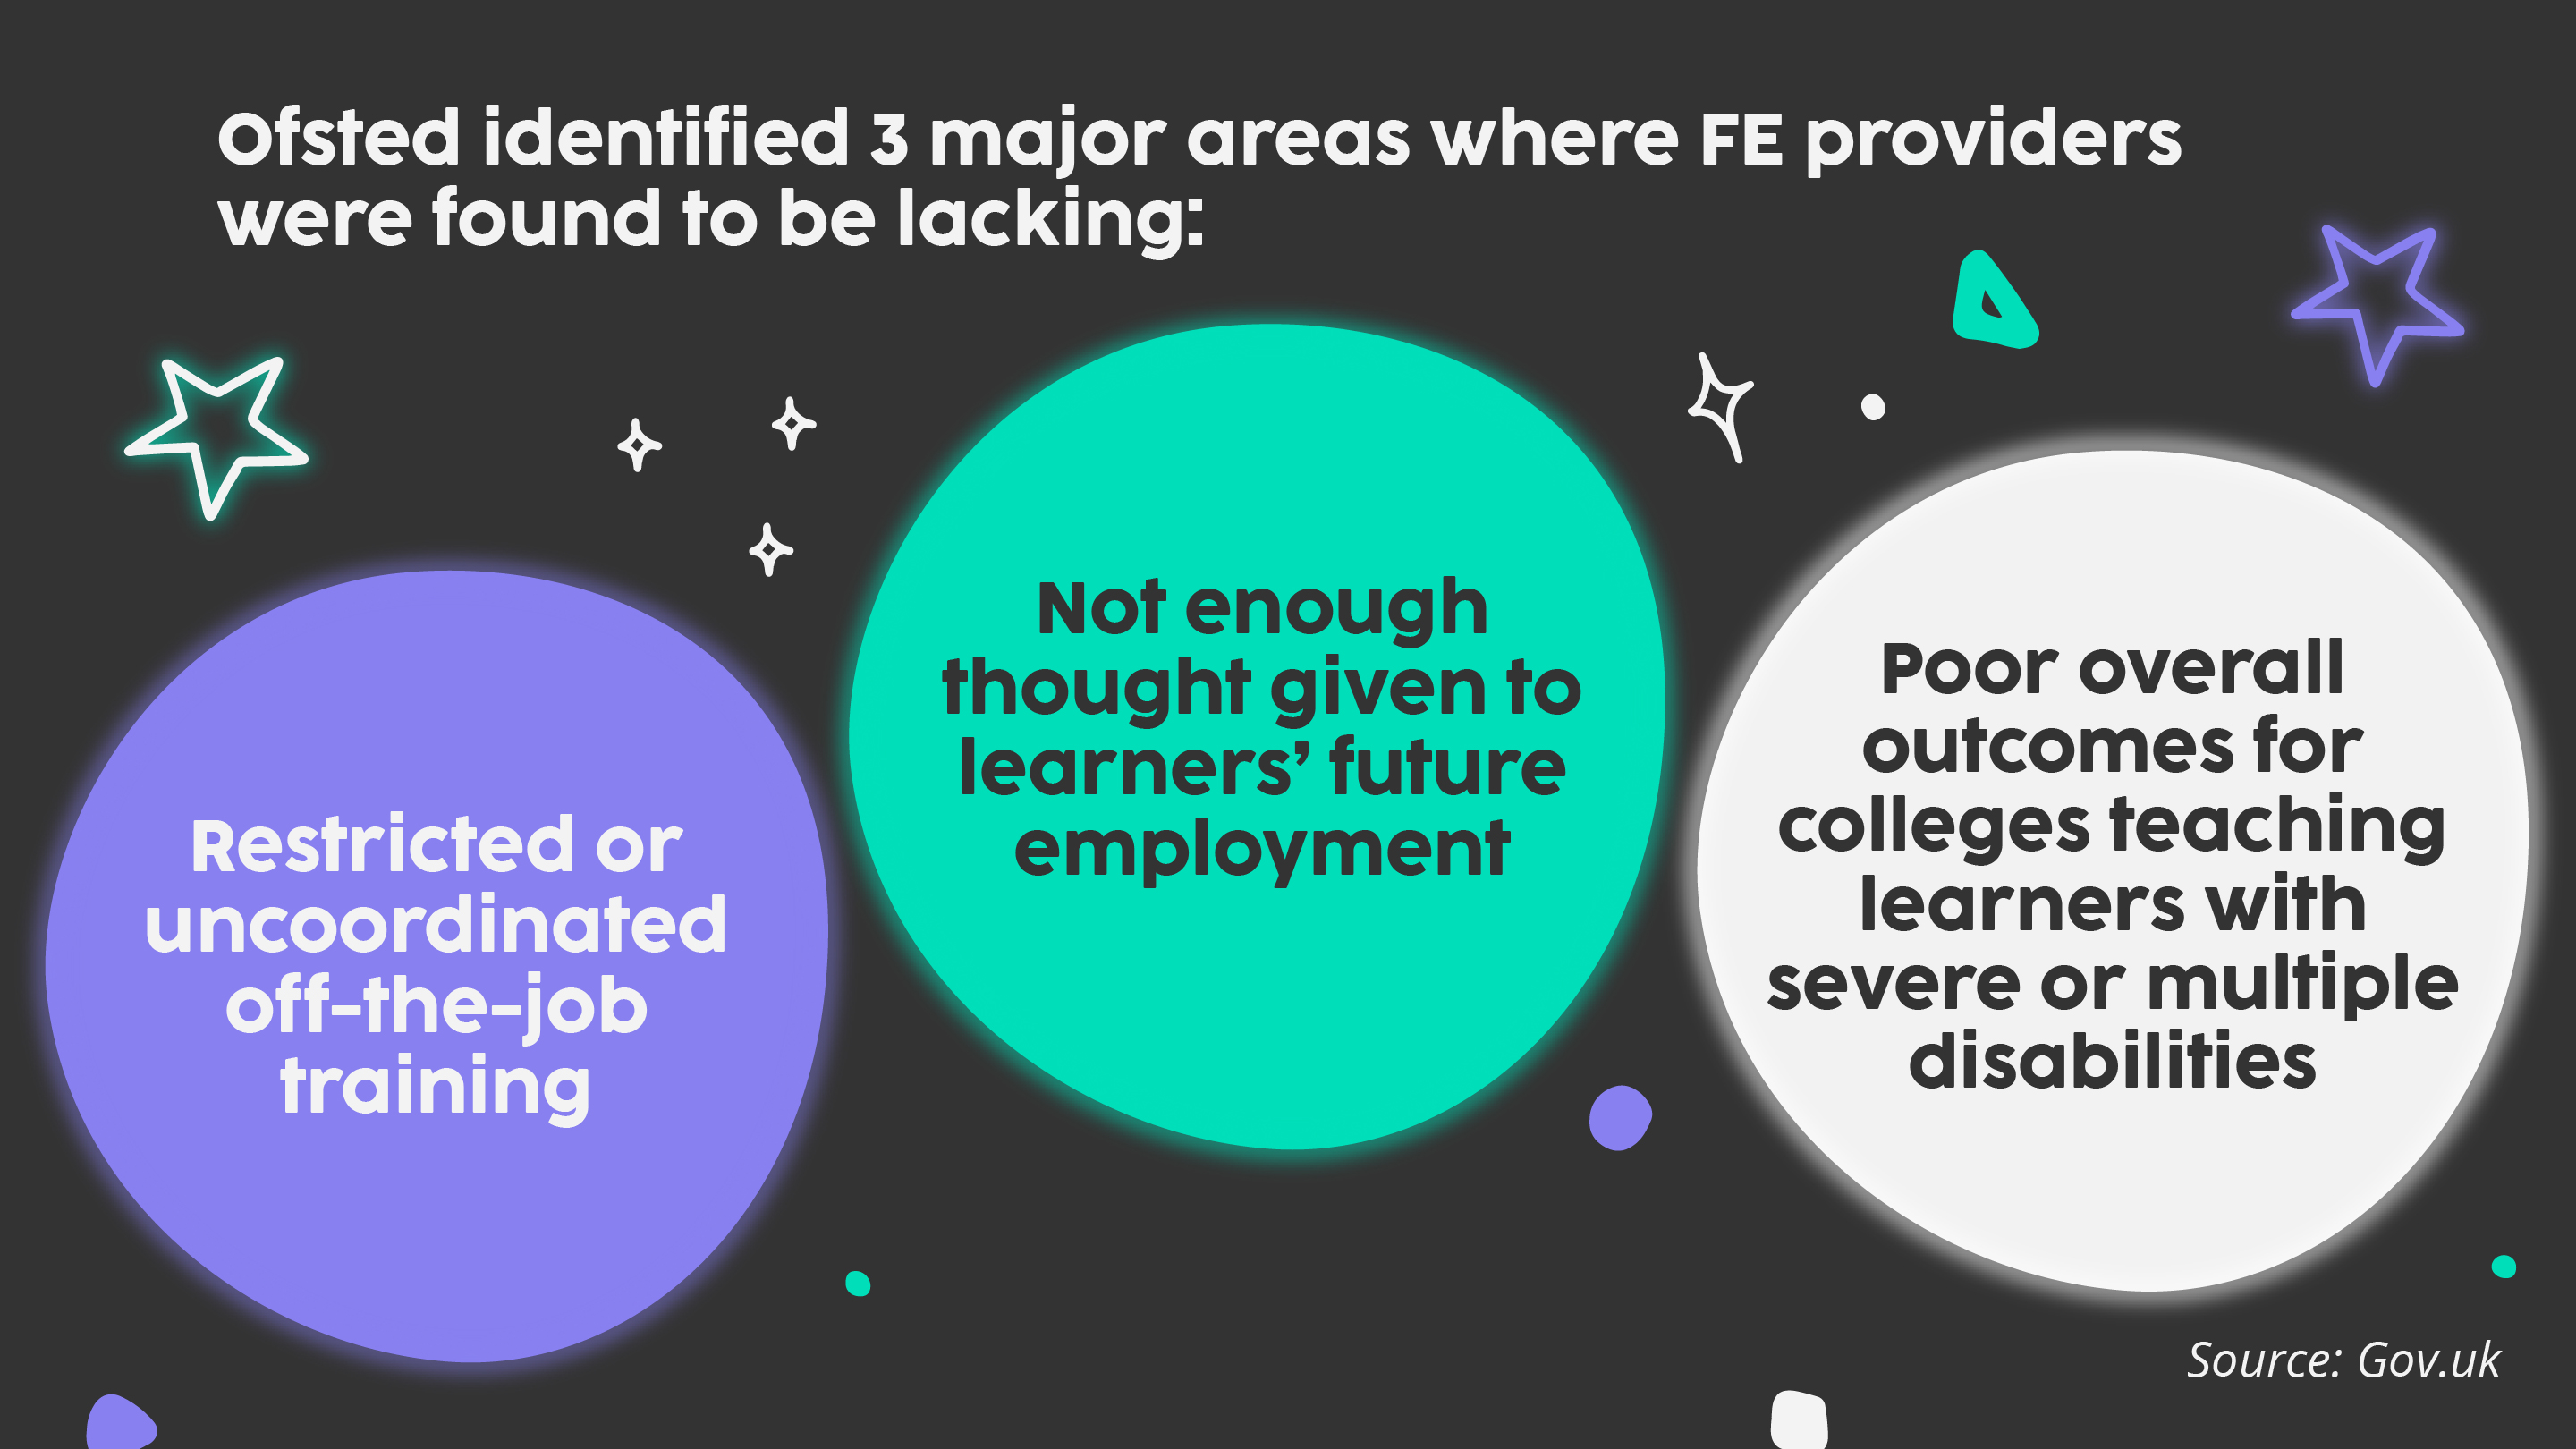 Ofsted identified 3 key areas for improvement among FE providers